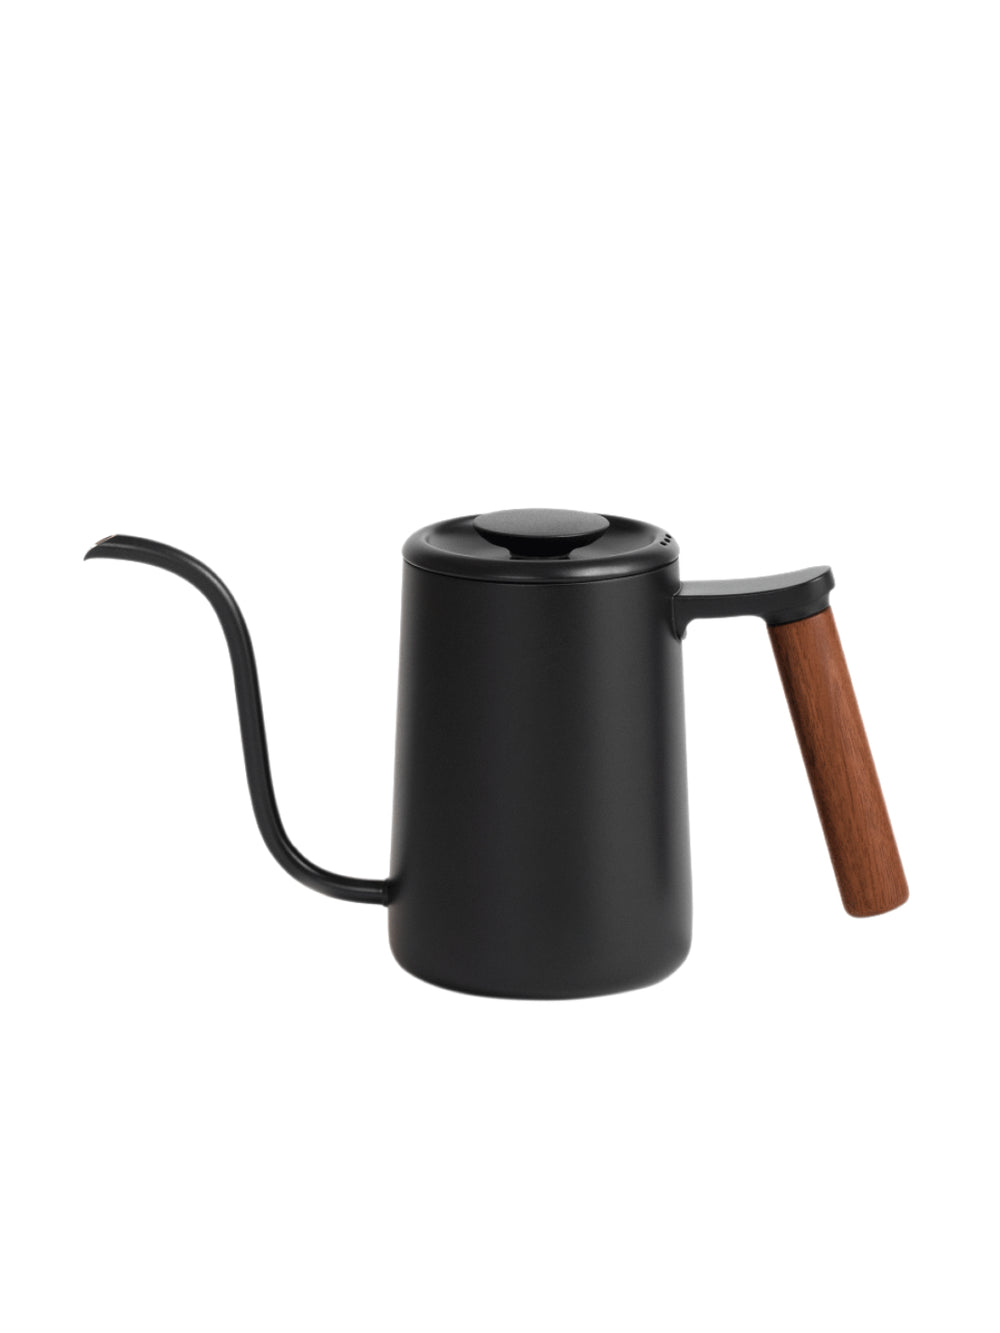 https://cdn.shopify.com/s/files/1/2404/0687/products/timemore_youth_kettle_black.jpg?v=1669409823&width=1000